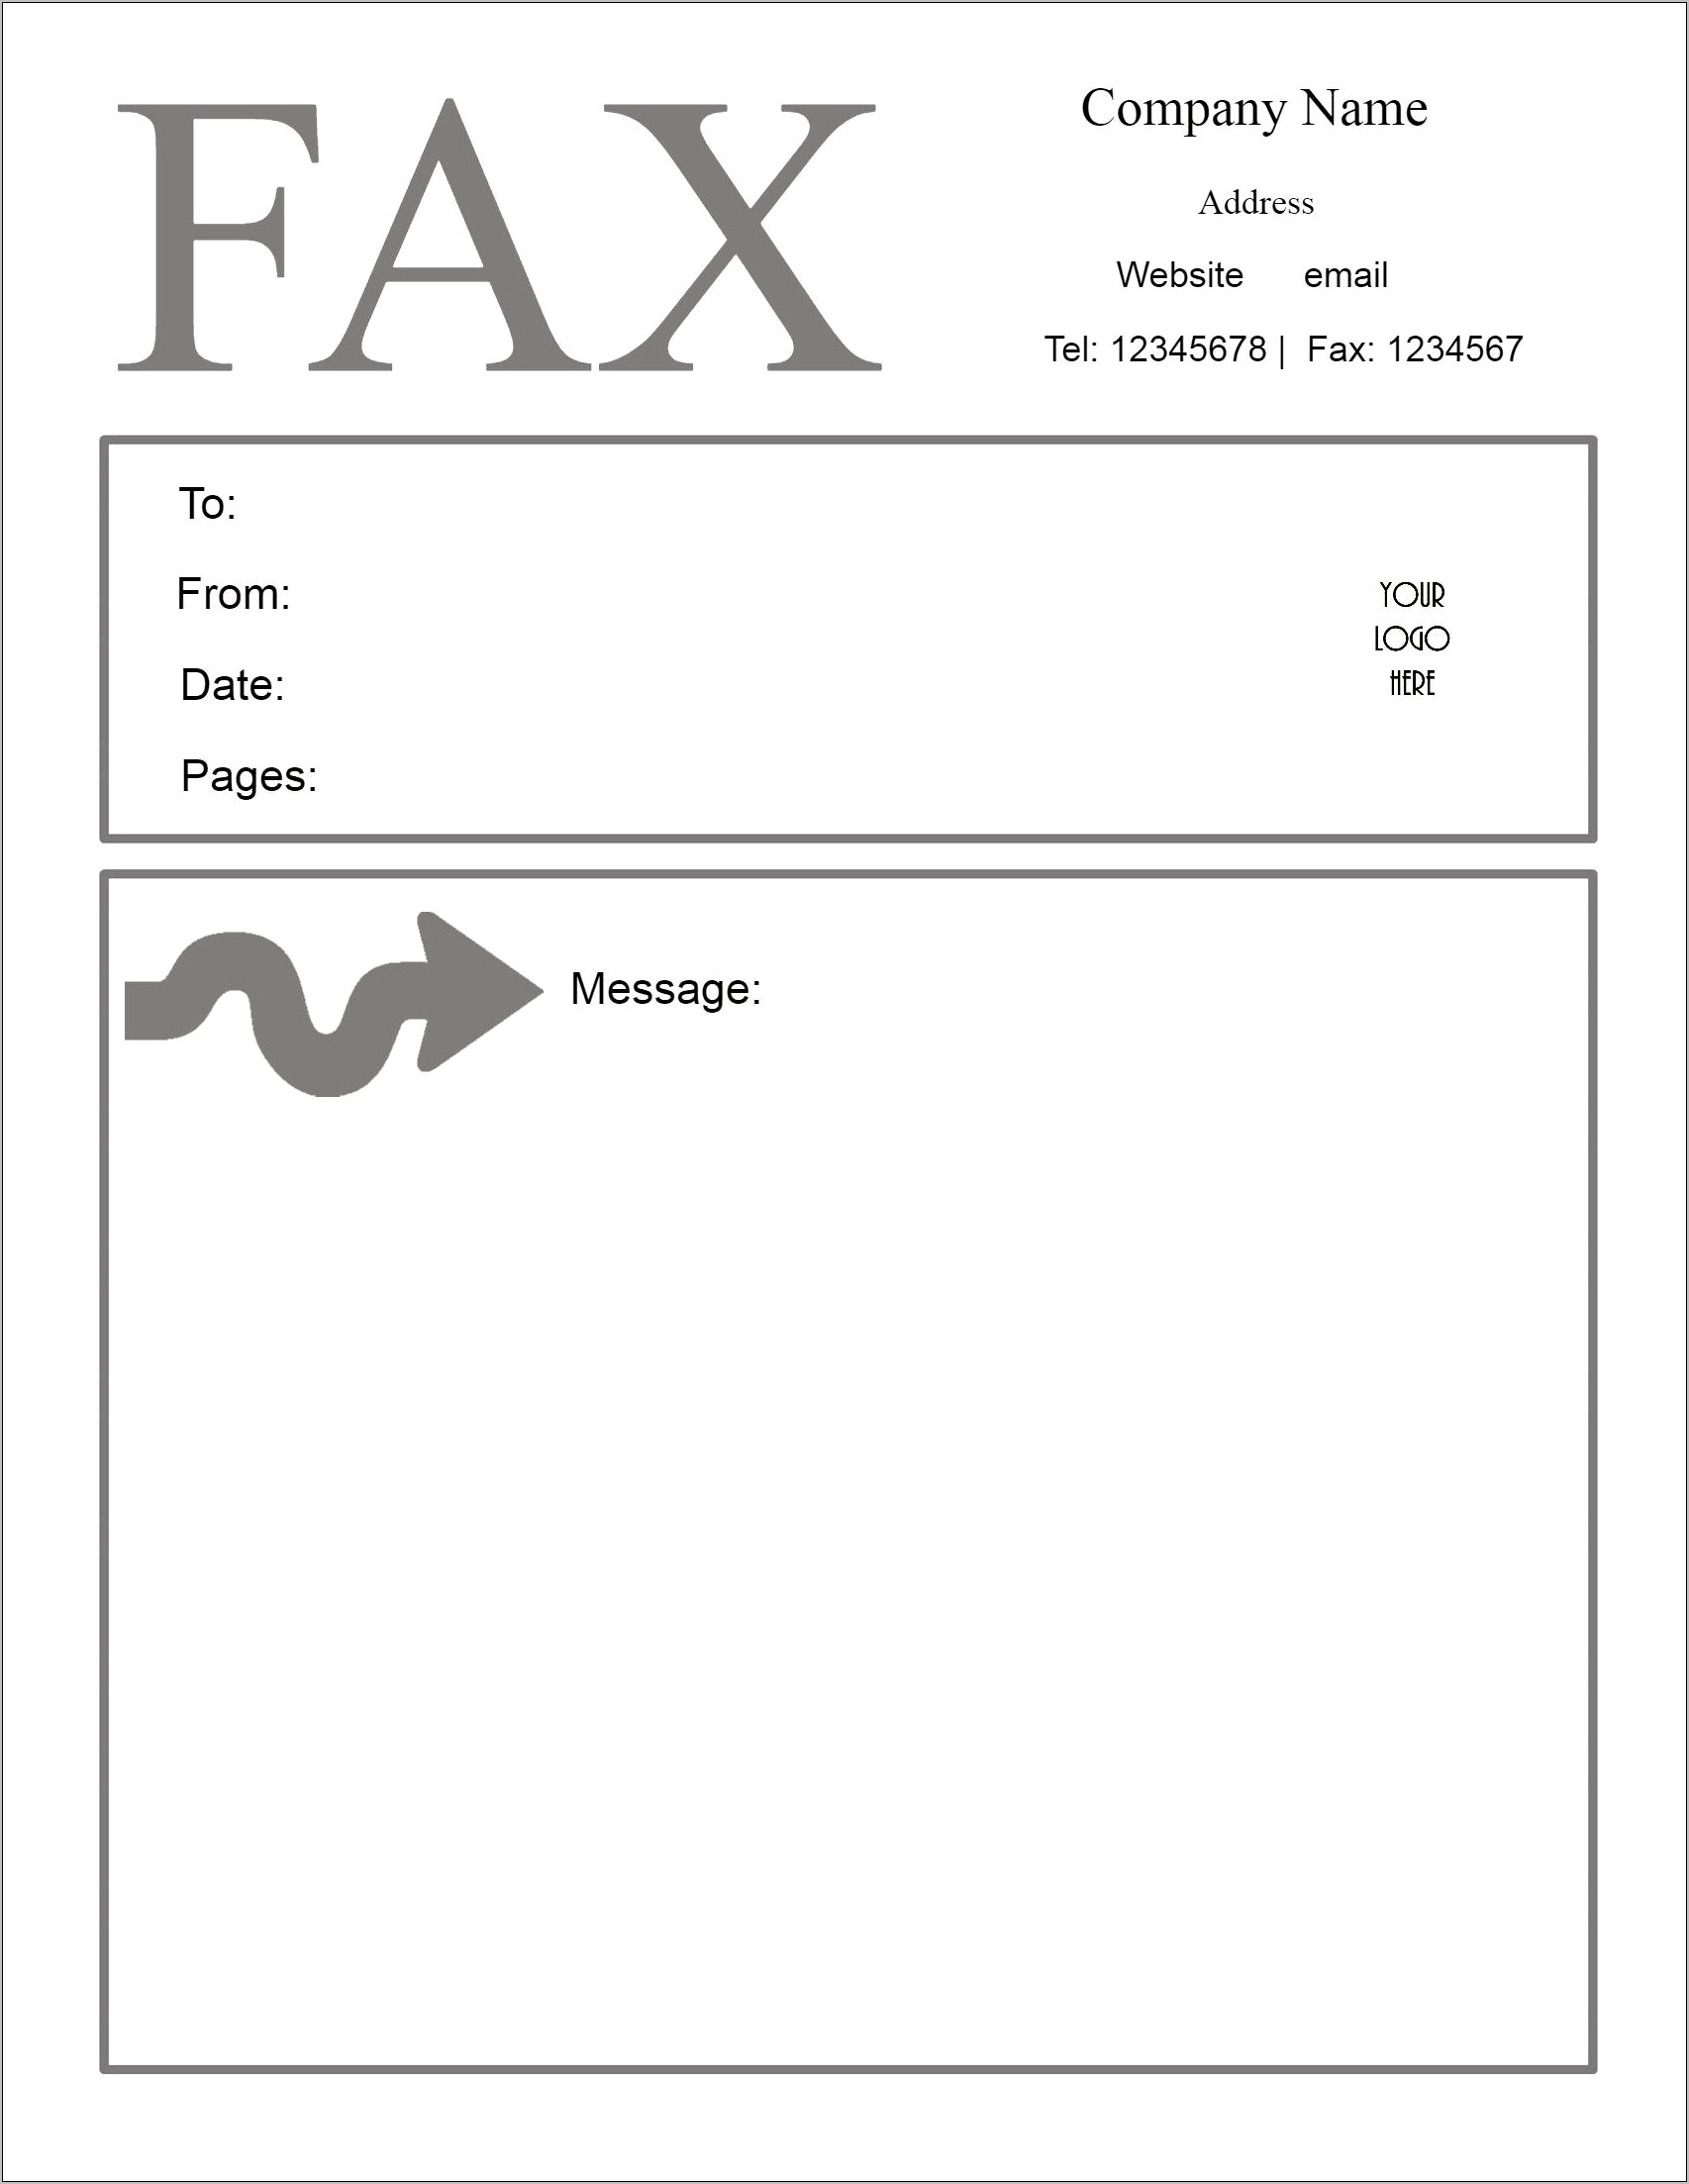 Microsoft Fax Cover Sheet Template Free